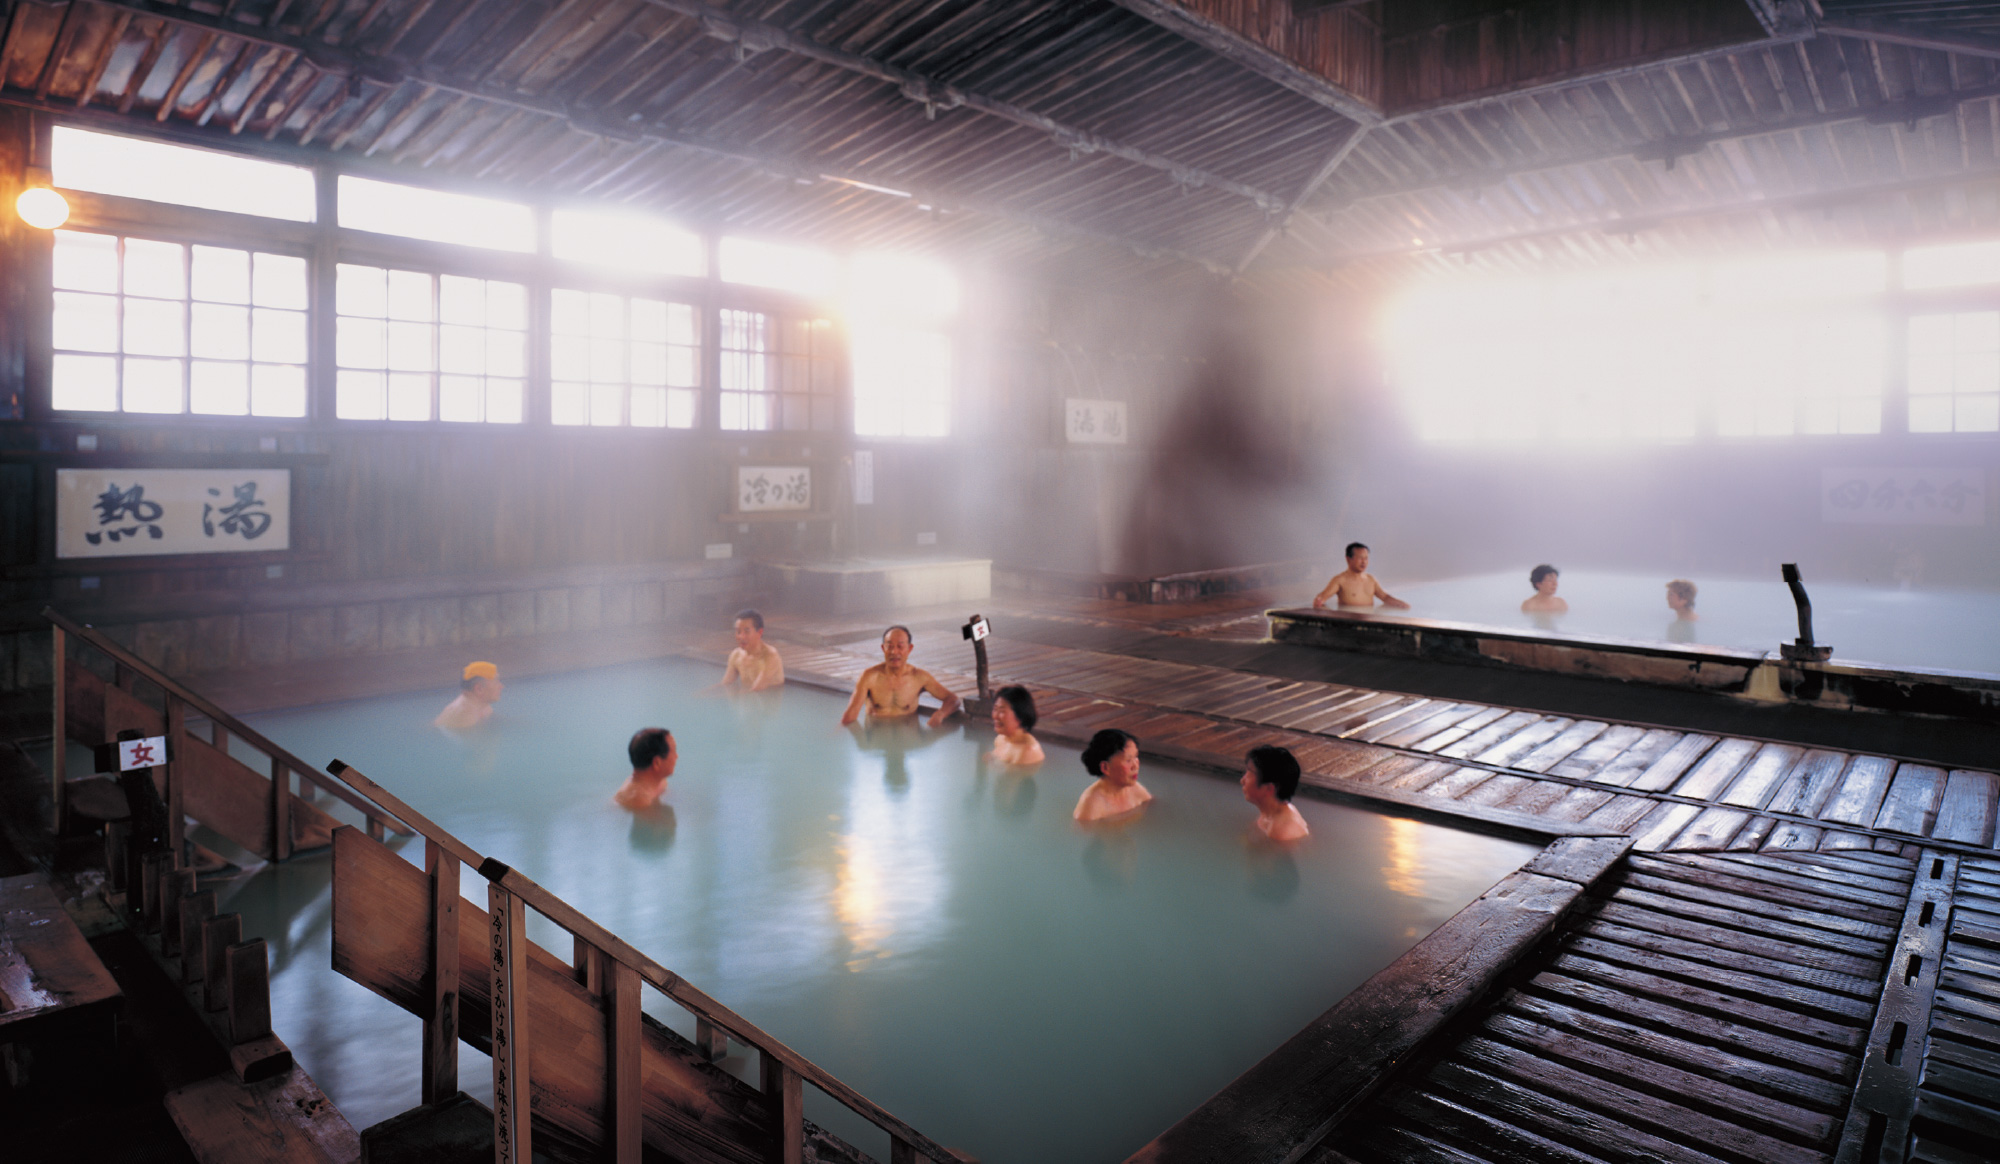 Sukayu Onsen A Mixed-Gender Bath with Room for 1,000 People!